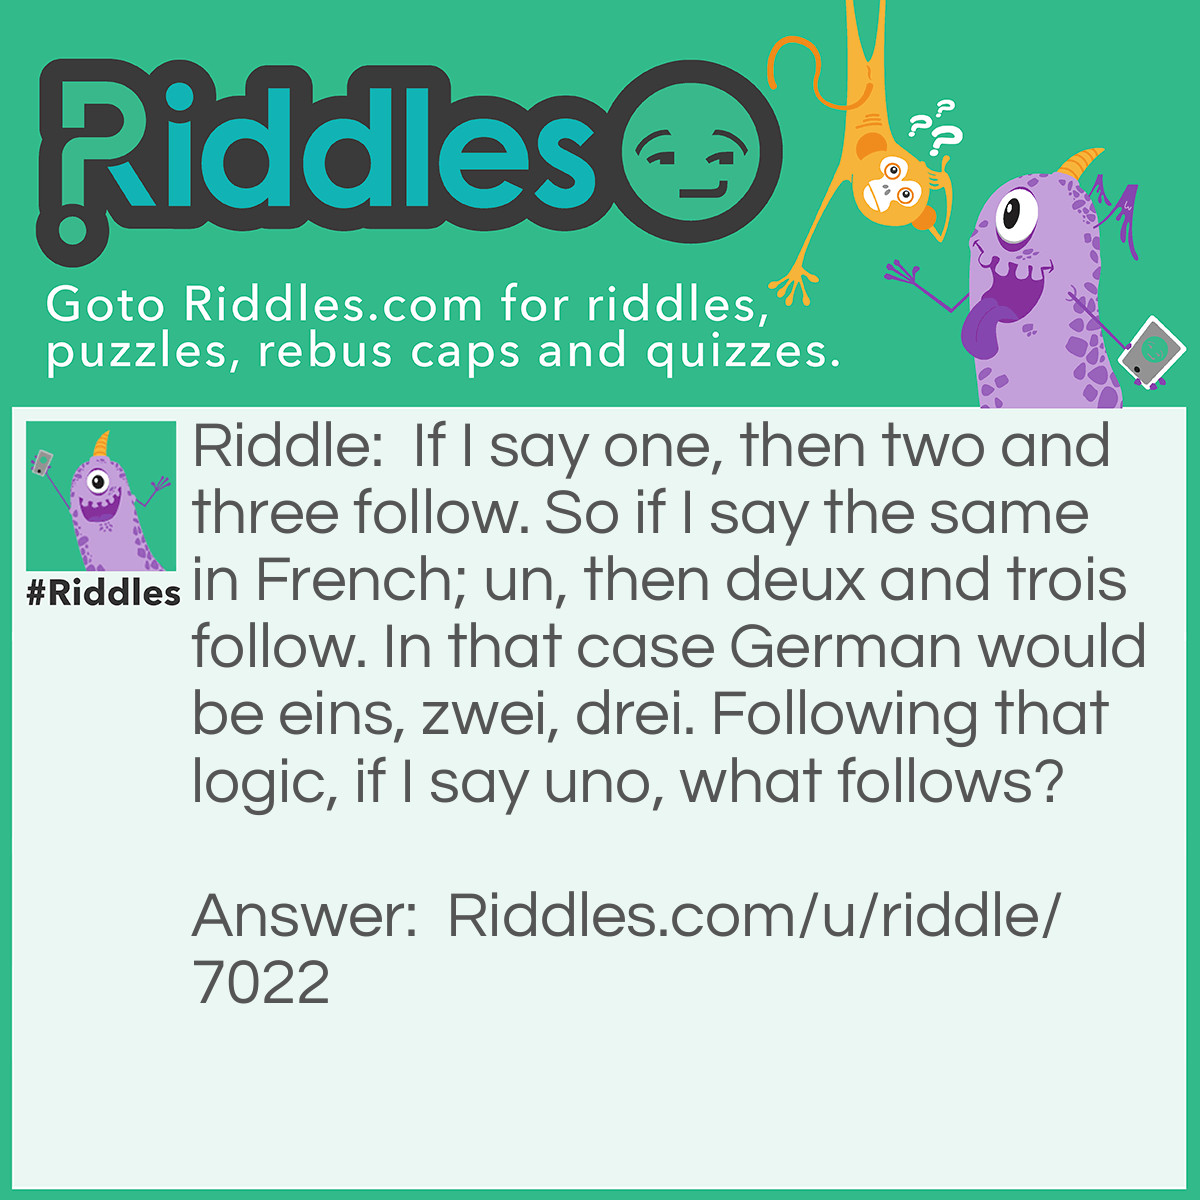 Riddle: If I say one, then two and three follow. So if I say the same in French; un, then deux and trois follow. In that case German would be eins, zwei, drei. Following that logic, if I say uno, what follows? Answer: A fit of rage, as I just won the game!